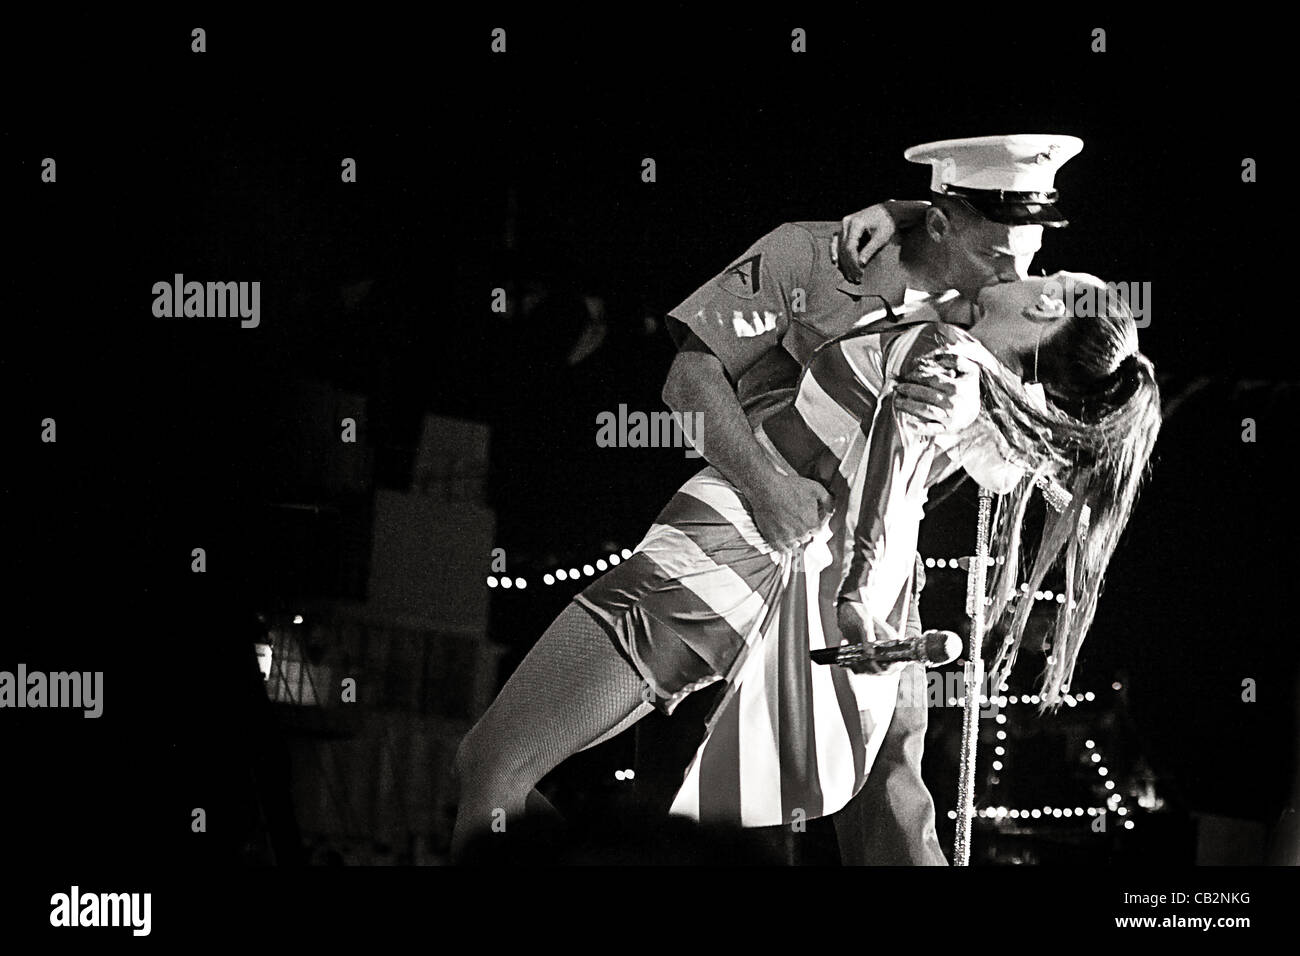 A US Marine kiss singer, Katy Perry on stage during the opening night block party for Fleet Week New York May 24, 2012 in New York, NY. In honor of the troops Perry pulled one Marine on stage to recreate the iconic V-J Day Kiss photo from 1945 . The Marine grabbed Katy, dipped her back and gave her Stock Photo